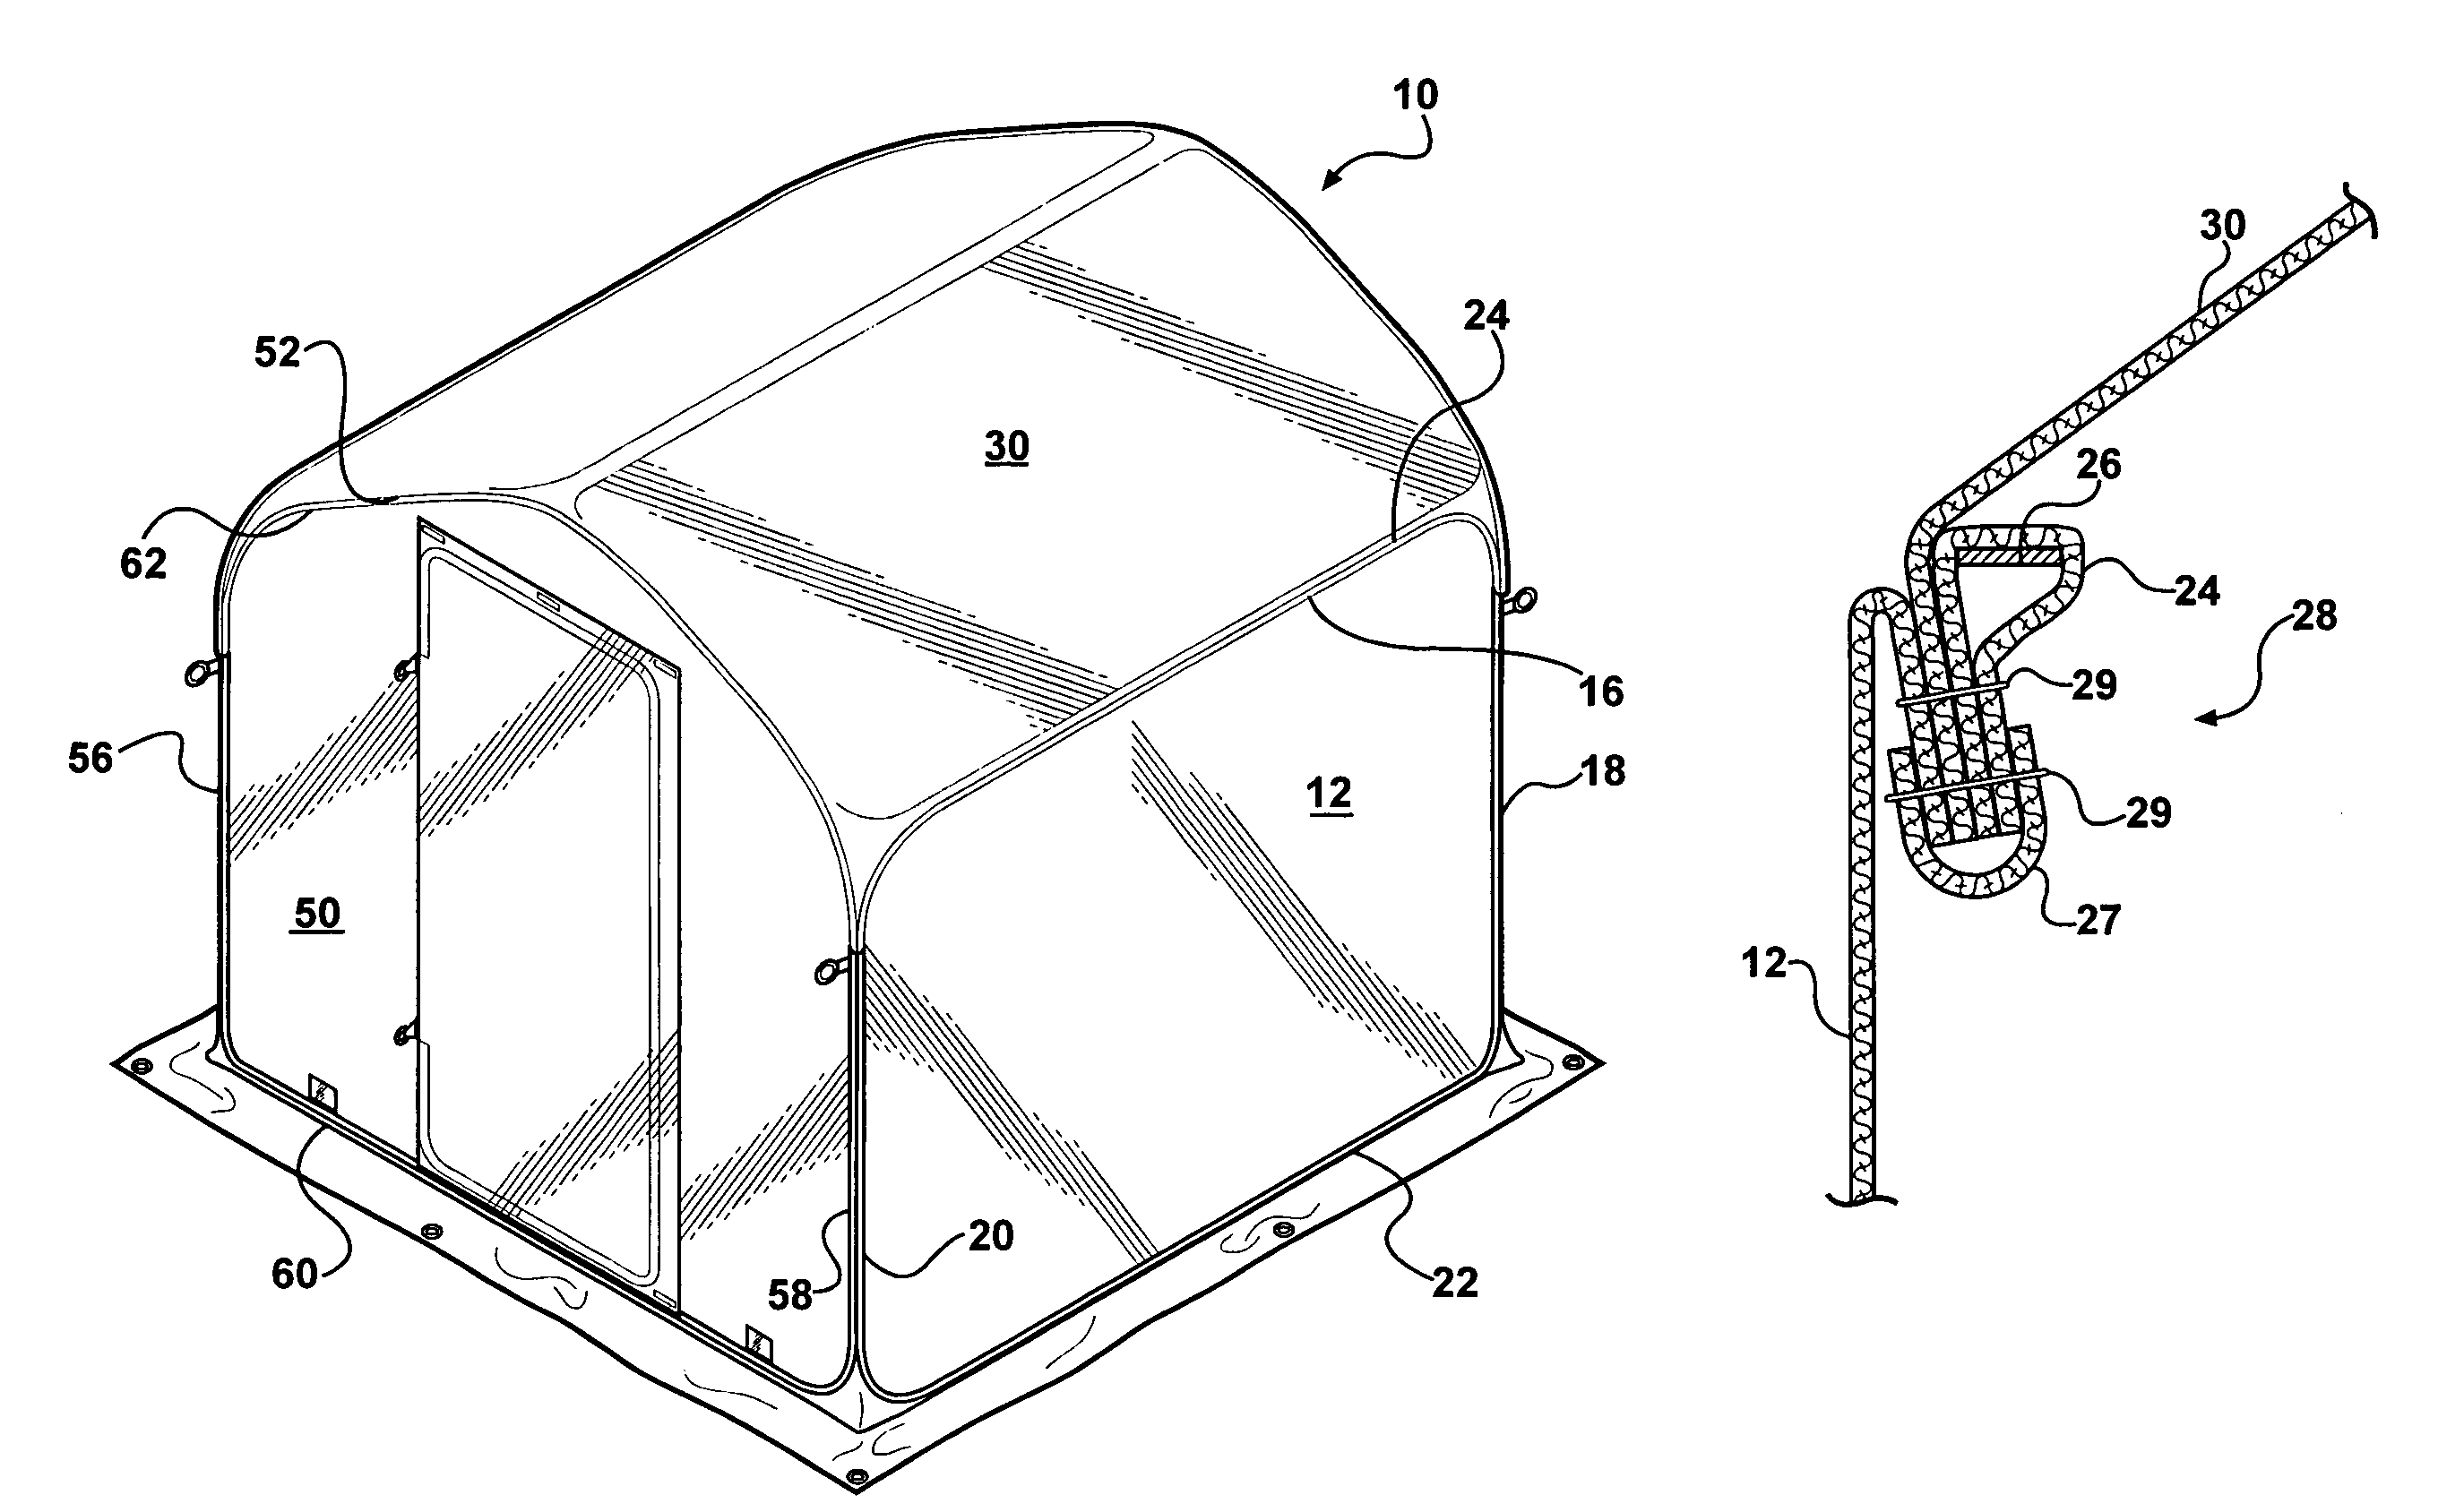 Collapsible structure with integrated sleeve junction